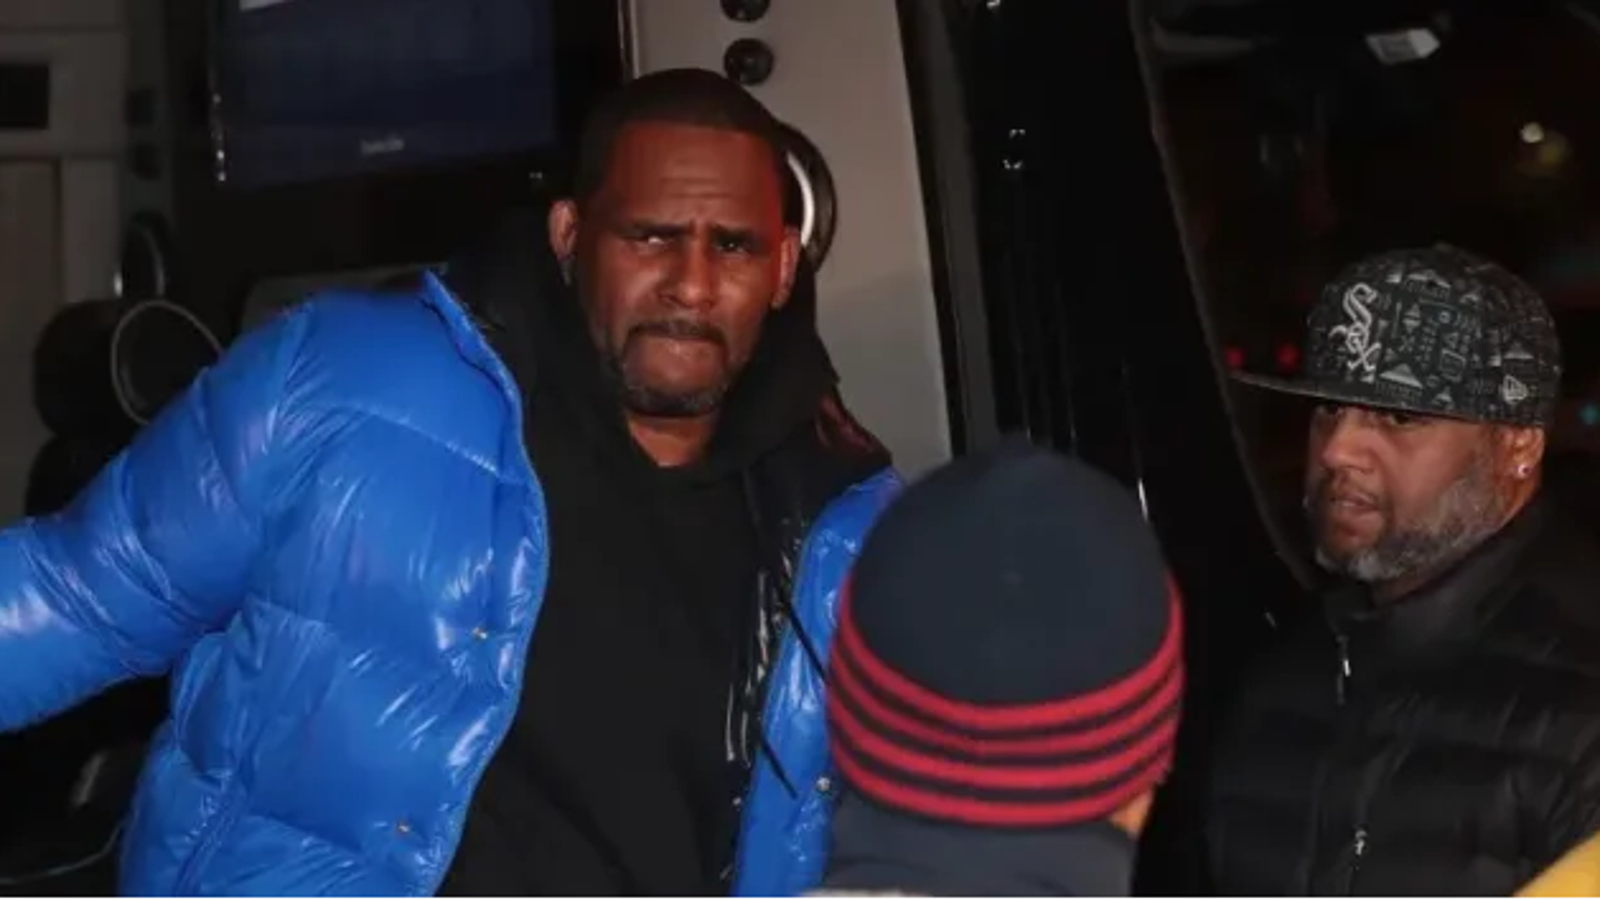 R. Kelly Gets Hysterical in New Interview With Gayle King1600 x 900